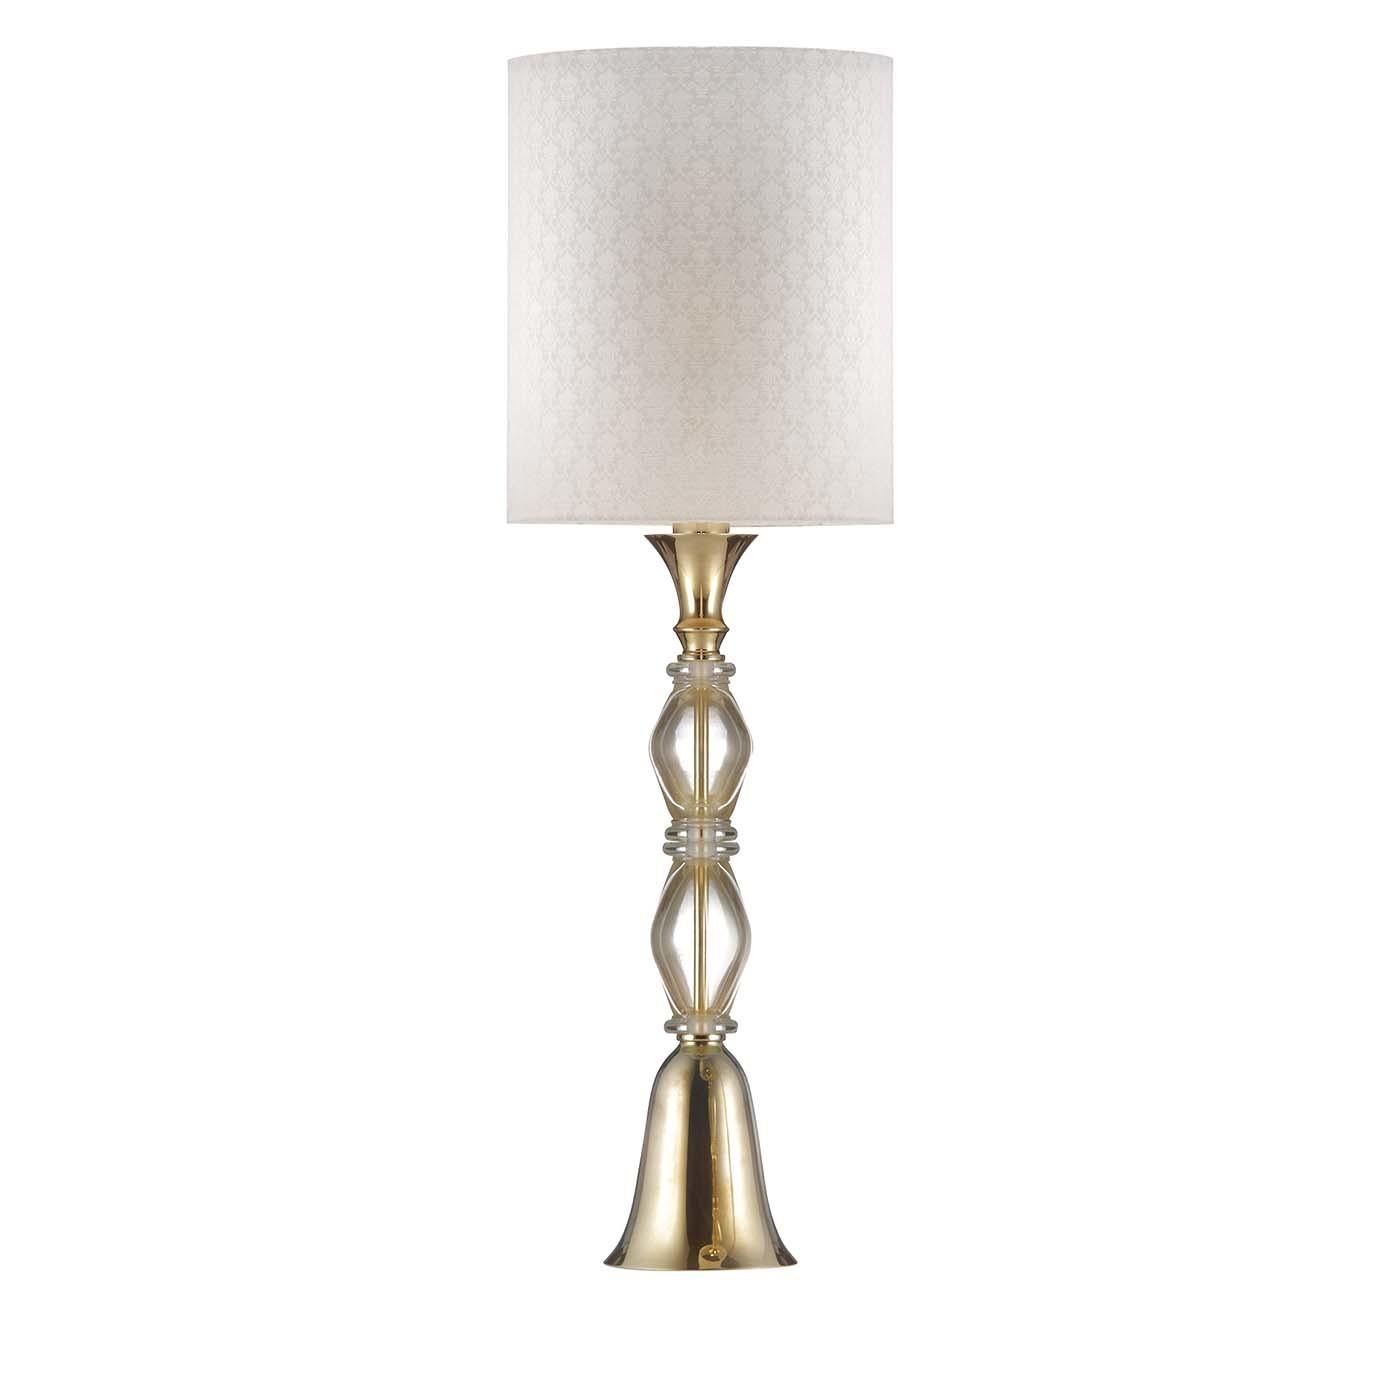 Exuding opulence and a sense of lightness, this table lamp will be a superb addition to a Classic or traditional decor. Displayed in an entryway or as an accent piece in a living room, this lamp will make a statement thanks to its imposing size. The